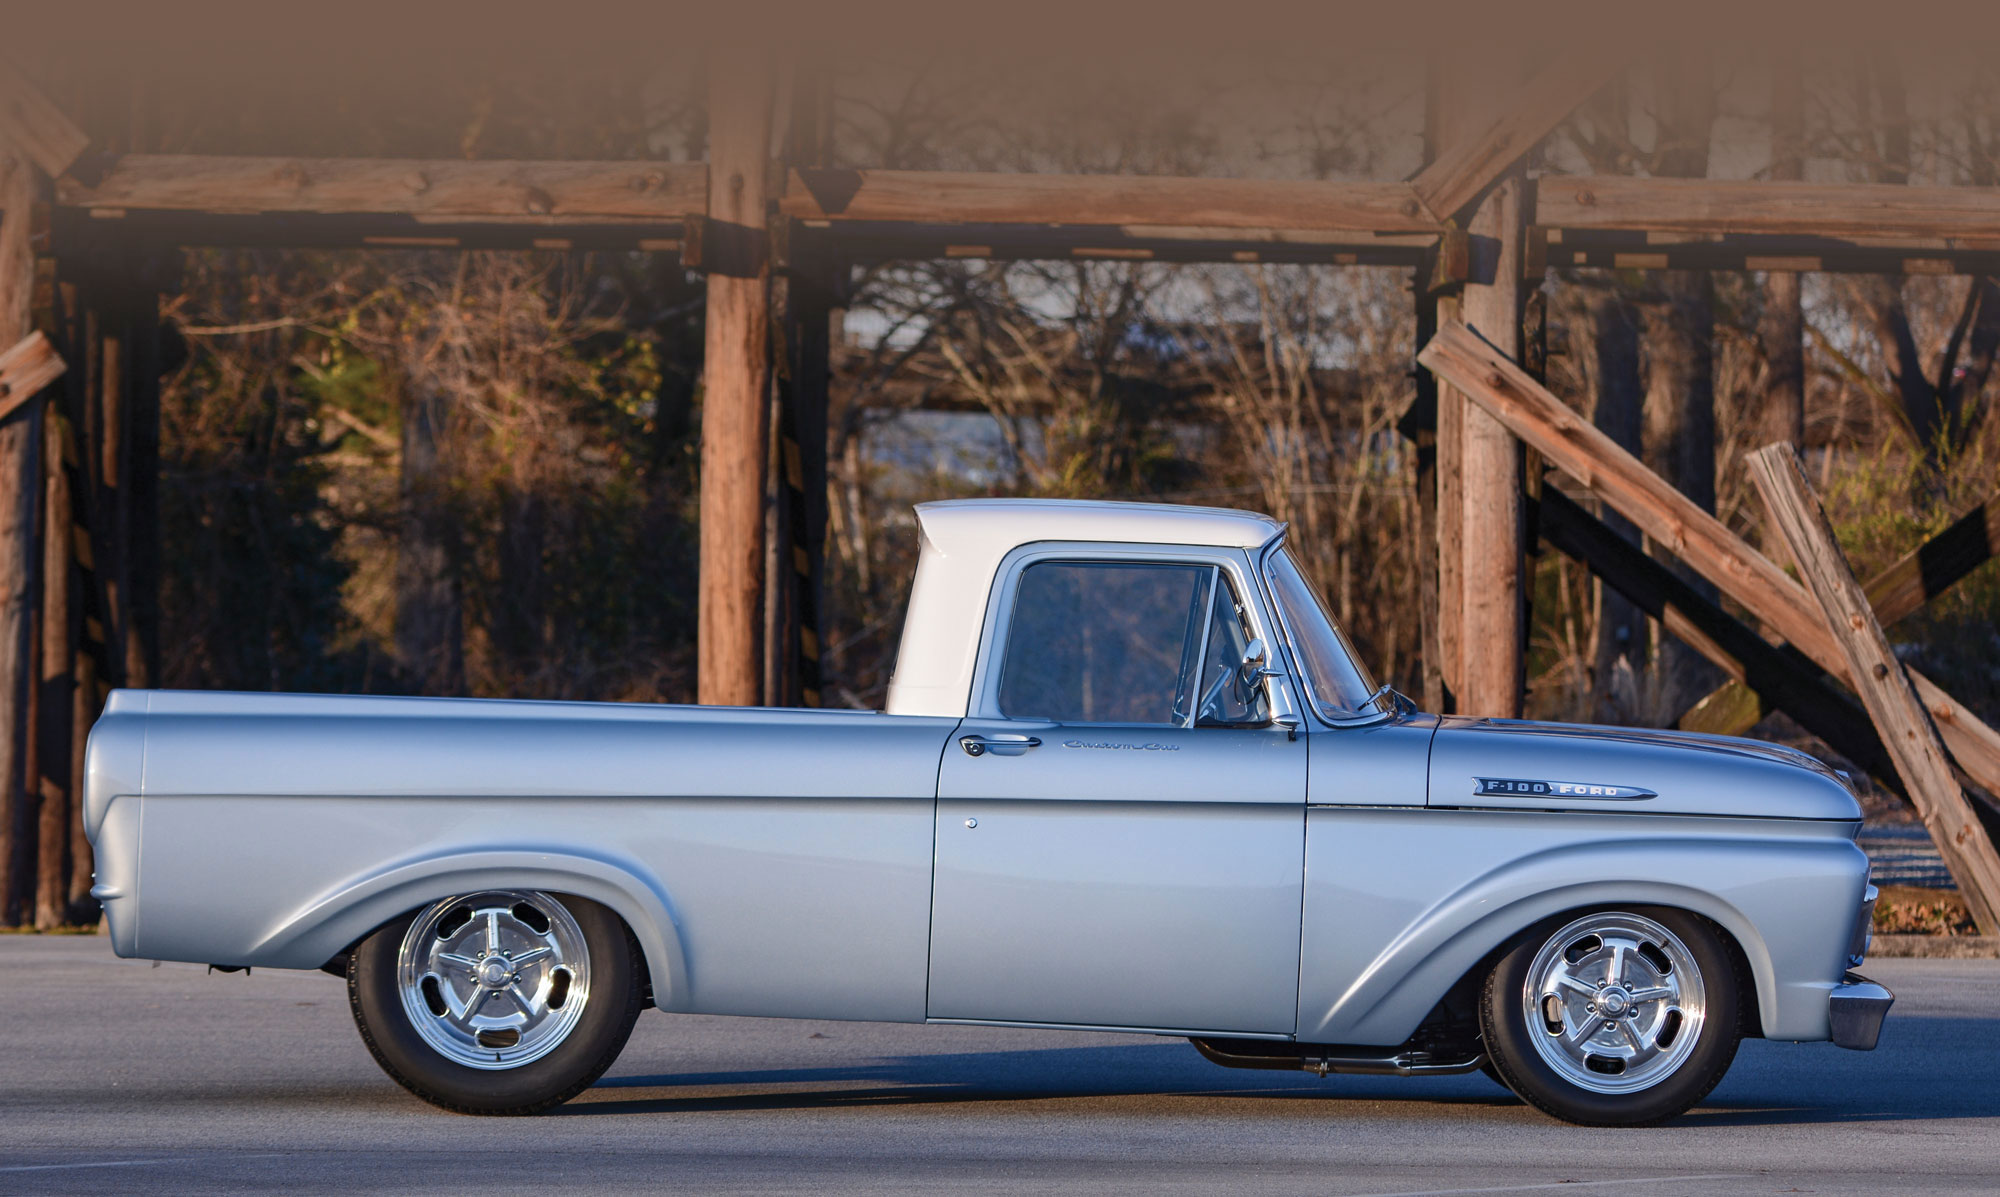 ’61 F-100 side view